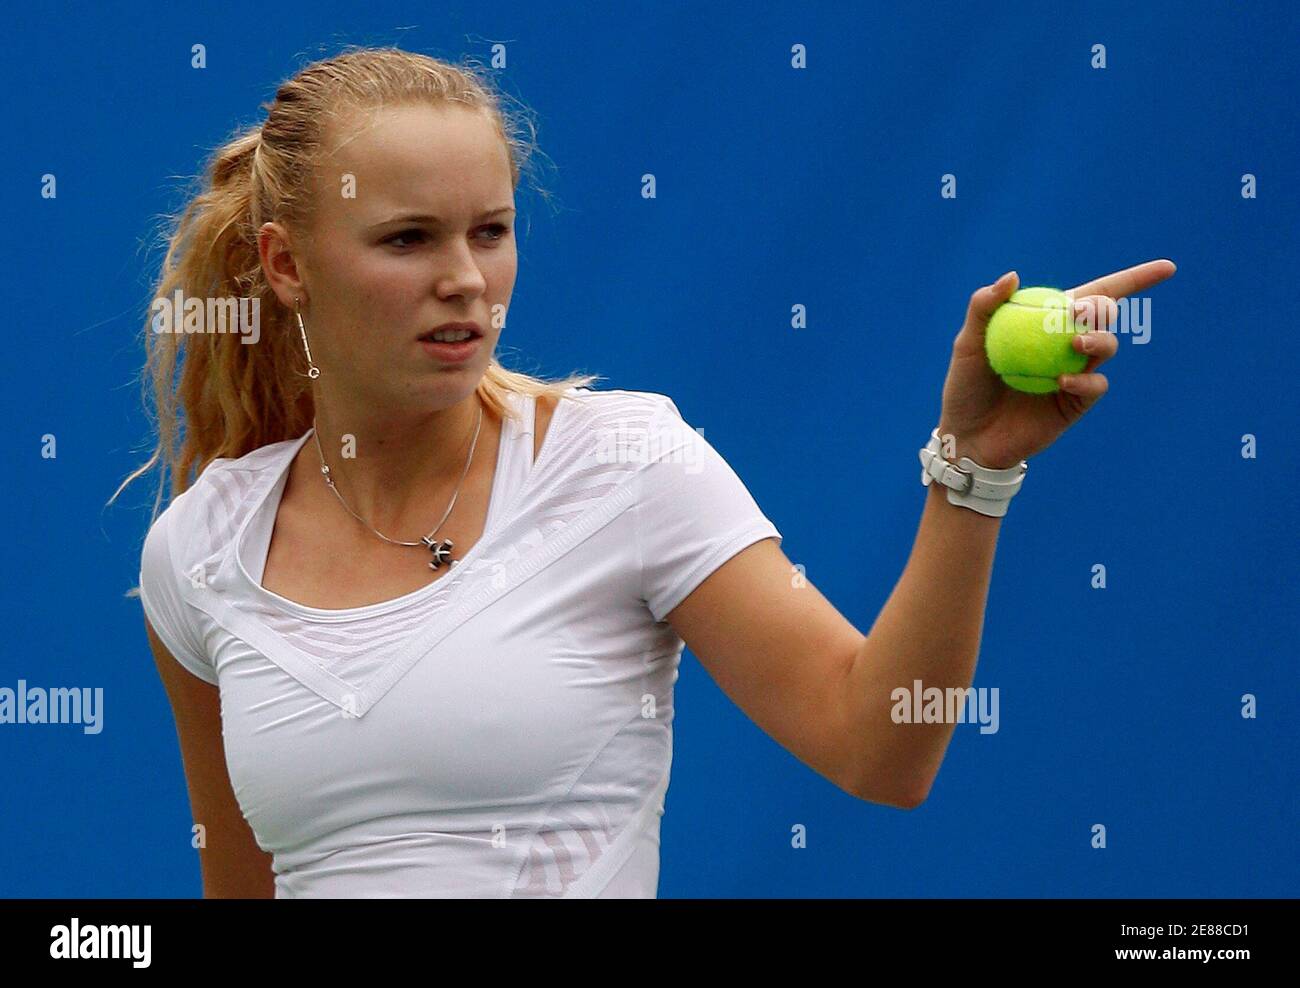 Caroline Wozniacki of Denmark react during a practice session for the upcoming Tennis Classic in Hong Kong January 5, 2010. The tournament will be played from January 6 to 9. REUTERS/Tyrone Siu    (CHINA - Tags: SPORT TENNIS) Stock Photo